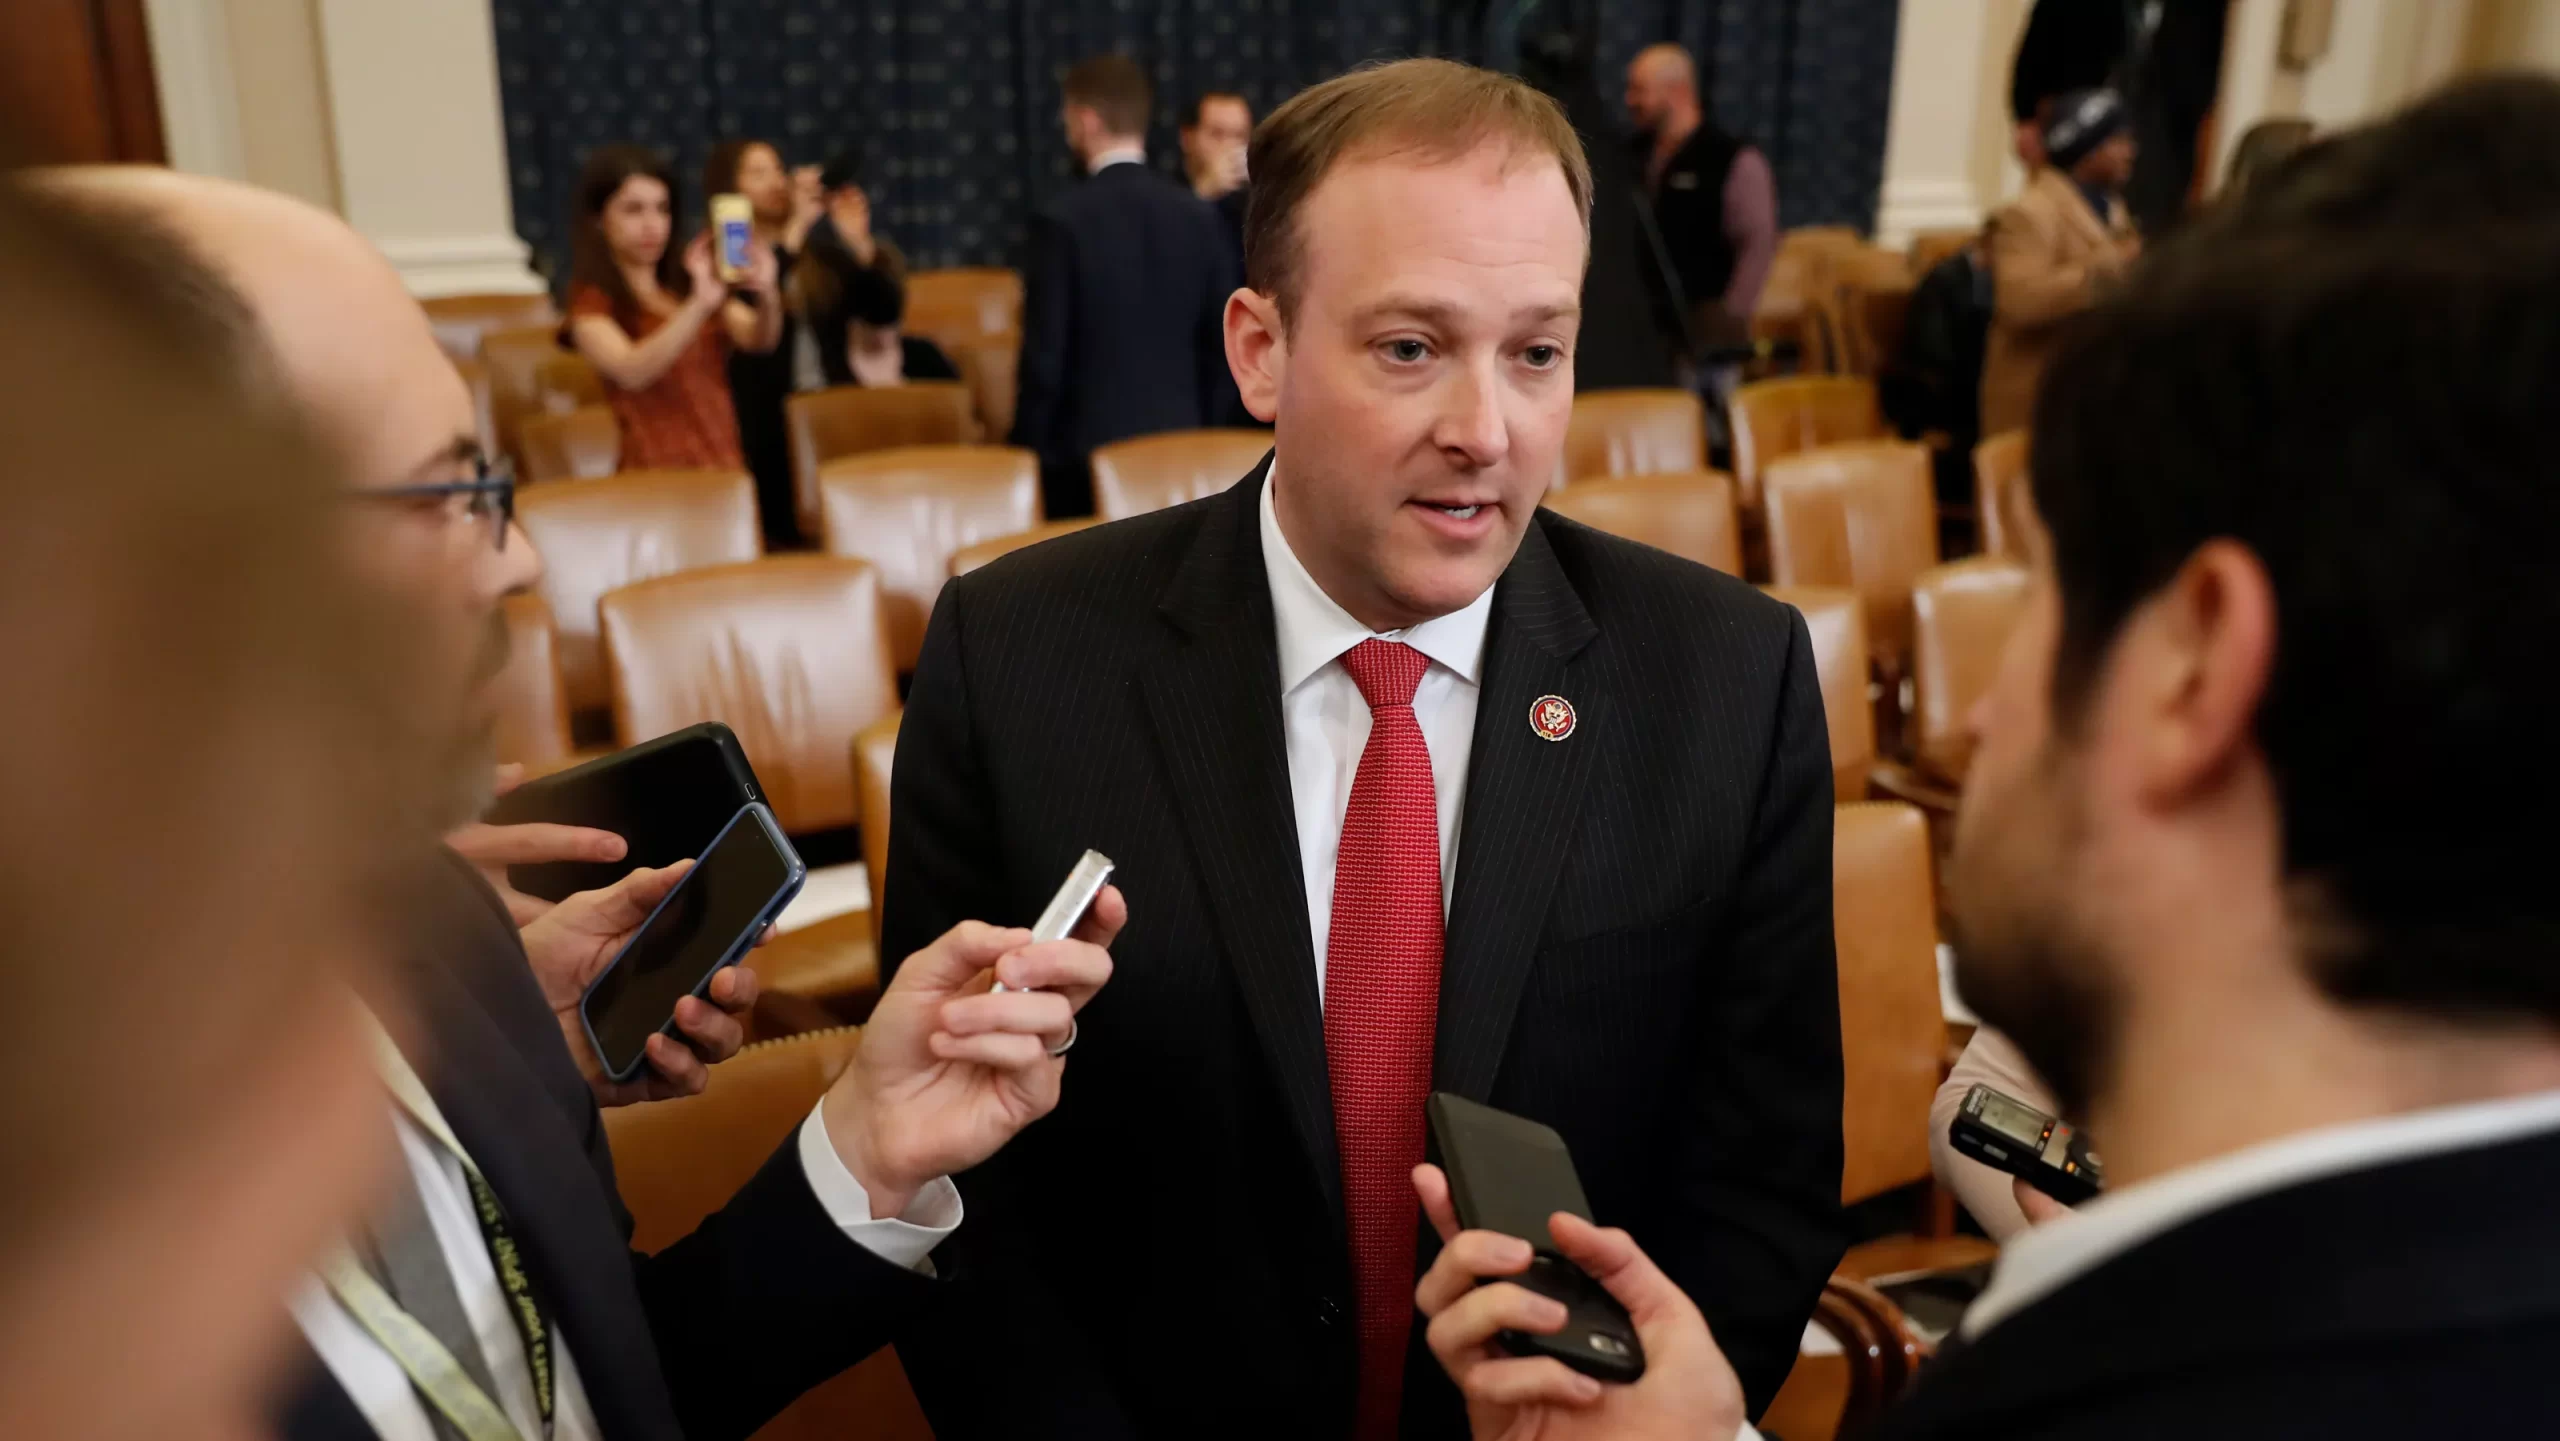 Zeldin asserts that, despite the fact that the situation has changed, his playbook hasn't changed much.